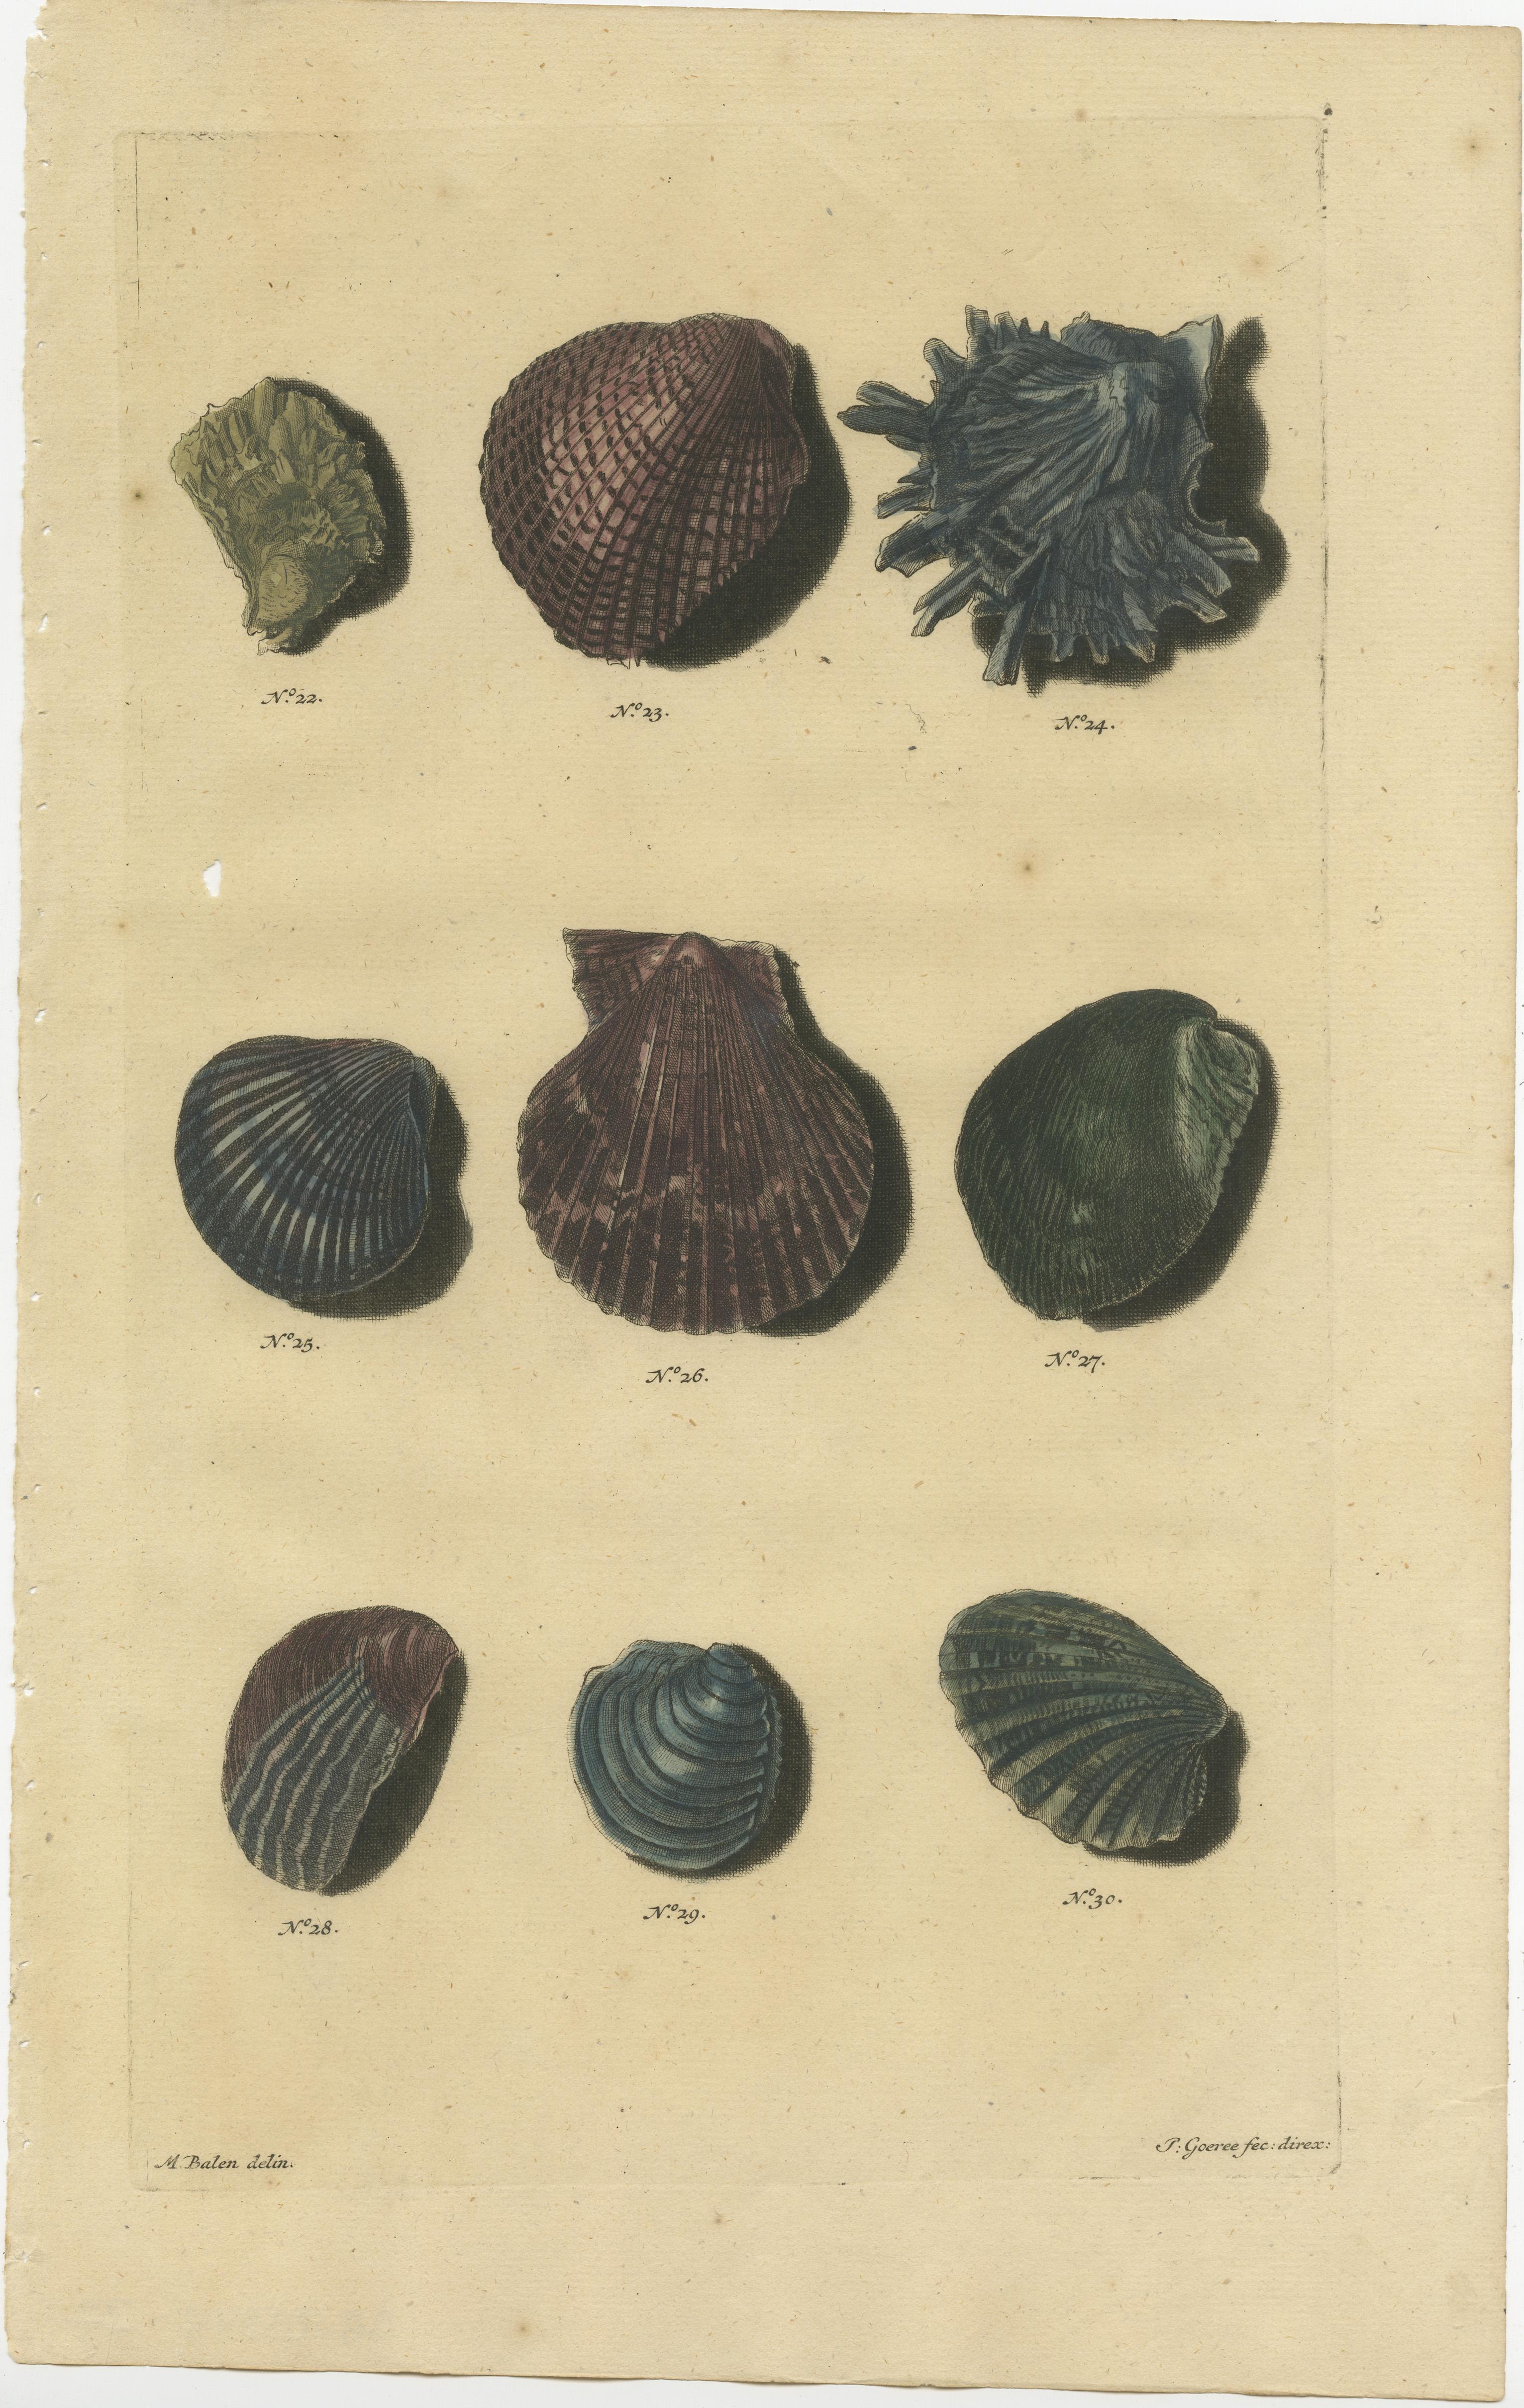 Set of six antique prints of various sea shells and molluscs. These print originate from 'Oud en Nieuw Oost-Indiën' by F. Valentijn.

François Valentyn or Valentijn (17 April 1666 – 6 August 1727) was a Dutch Calvinist minister, naturalist and